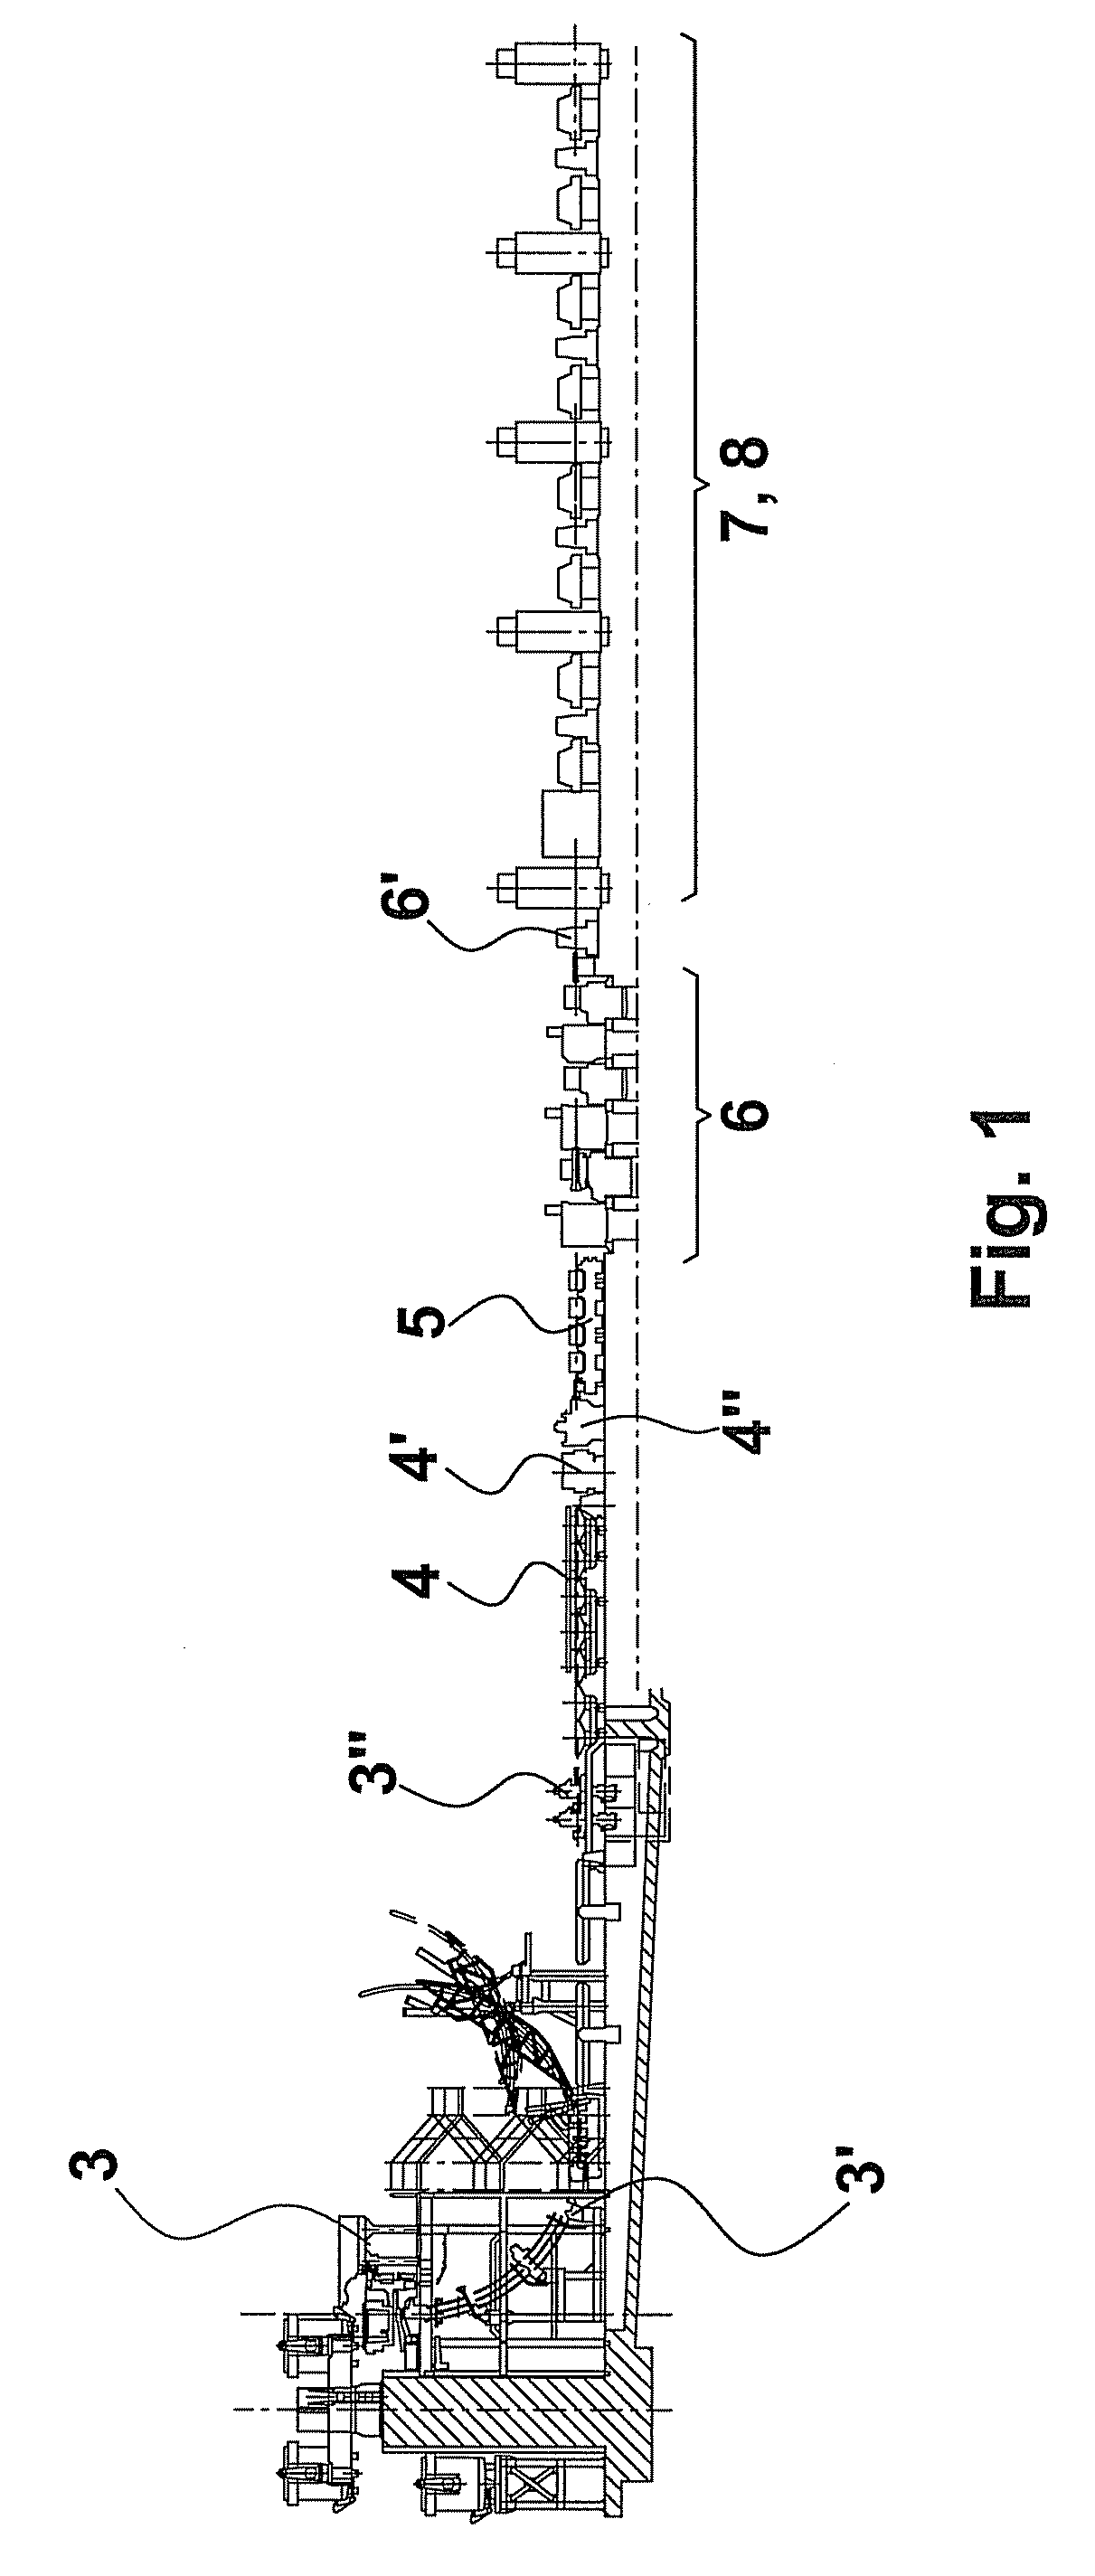 Compact Plant for Continuous Production of Bars and/or Profiles